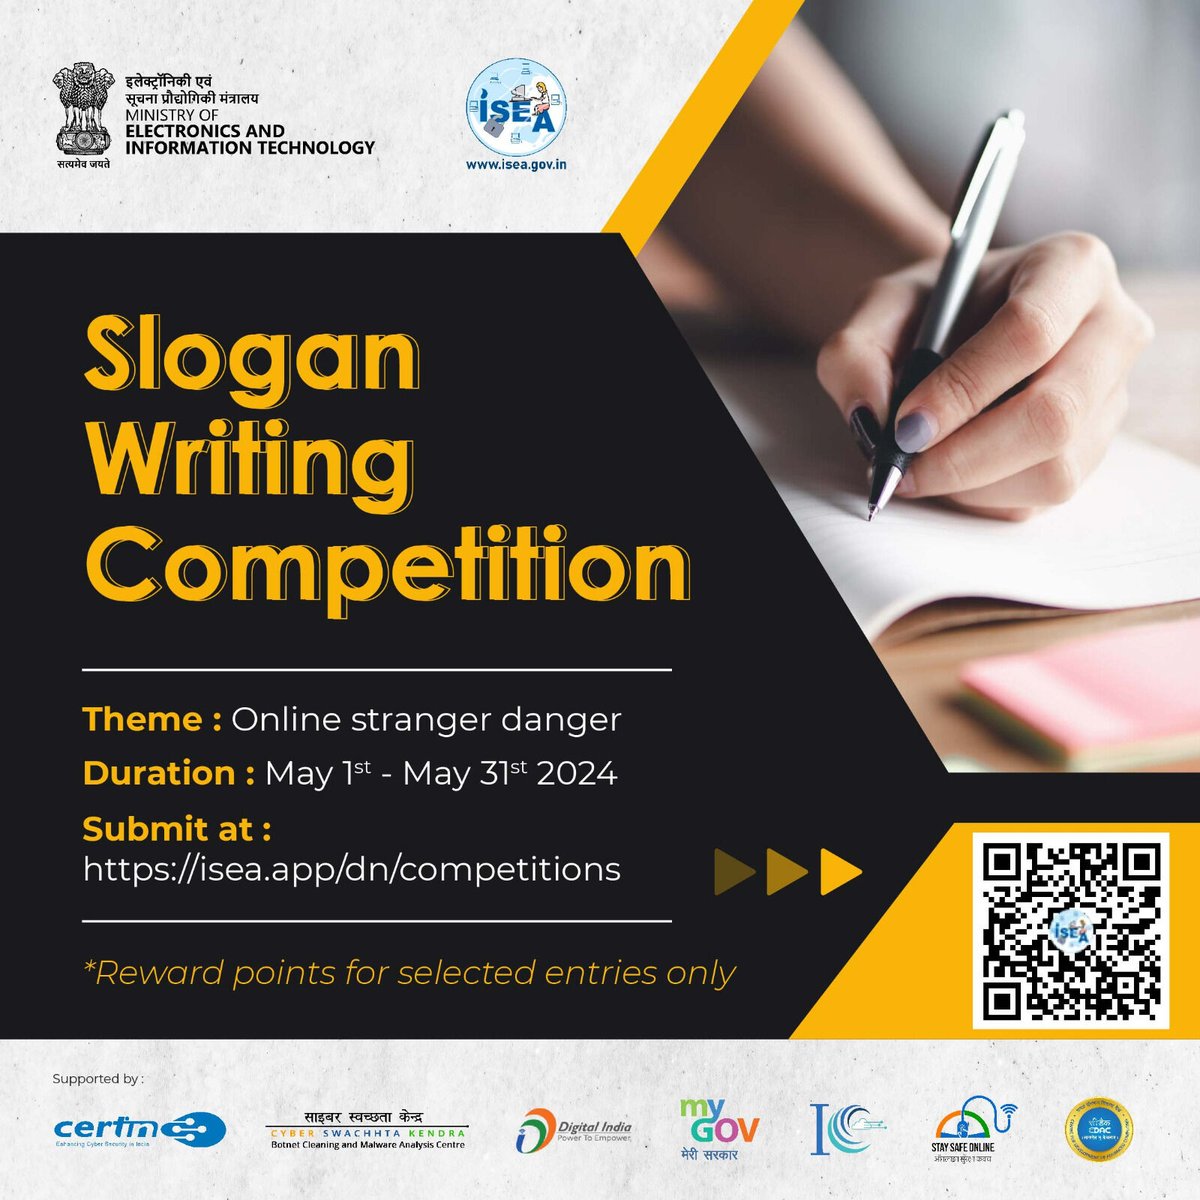 National Level Competitions Participate in competitions and win attractive prizes more details : Month wise theme: digitalnaagrik.isea.app/article/comp20… Share here: digitalnaagrik.isea.app/competitions